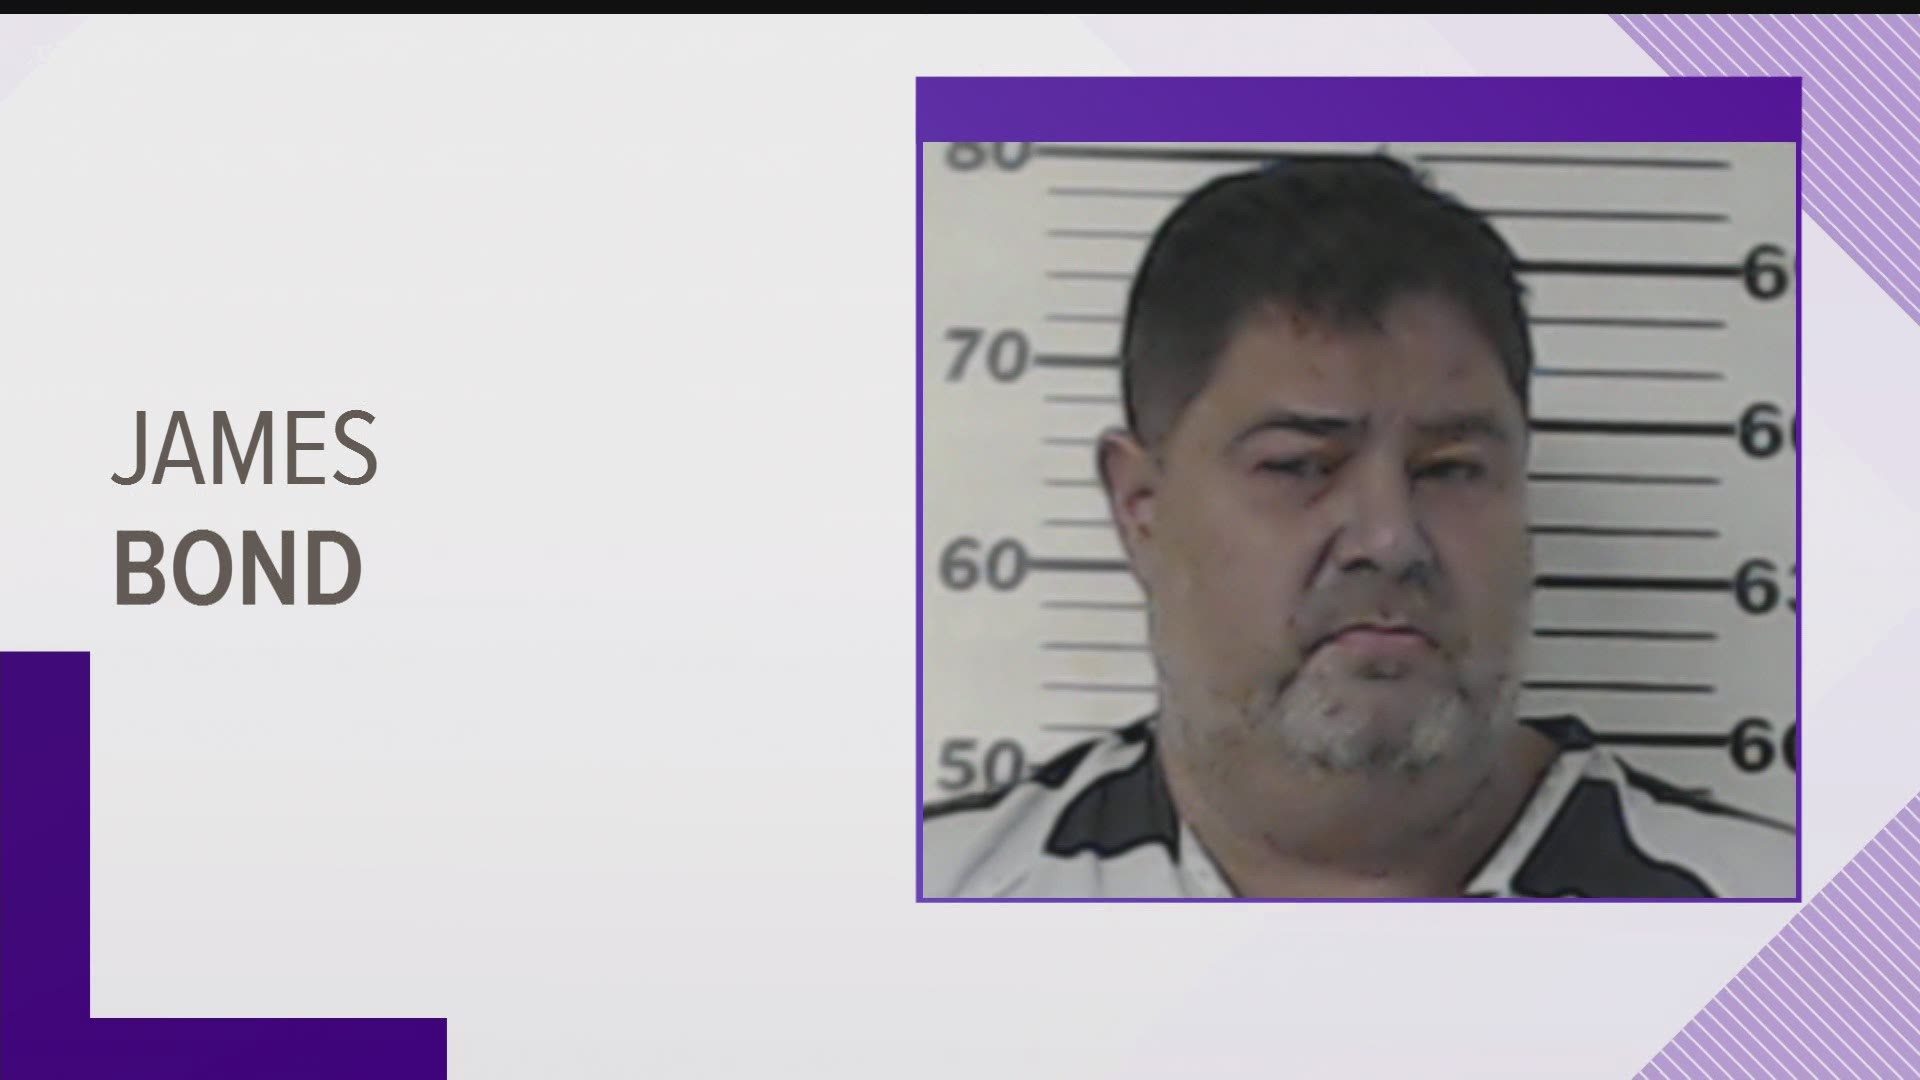 James Bond, 50, was booked into the Henderson County Jail.